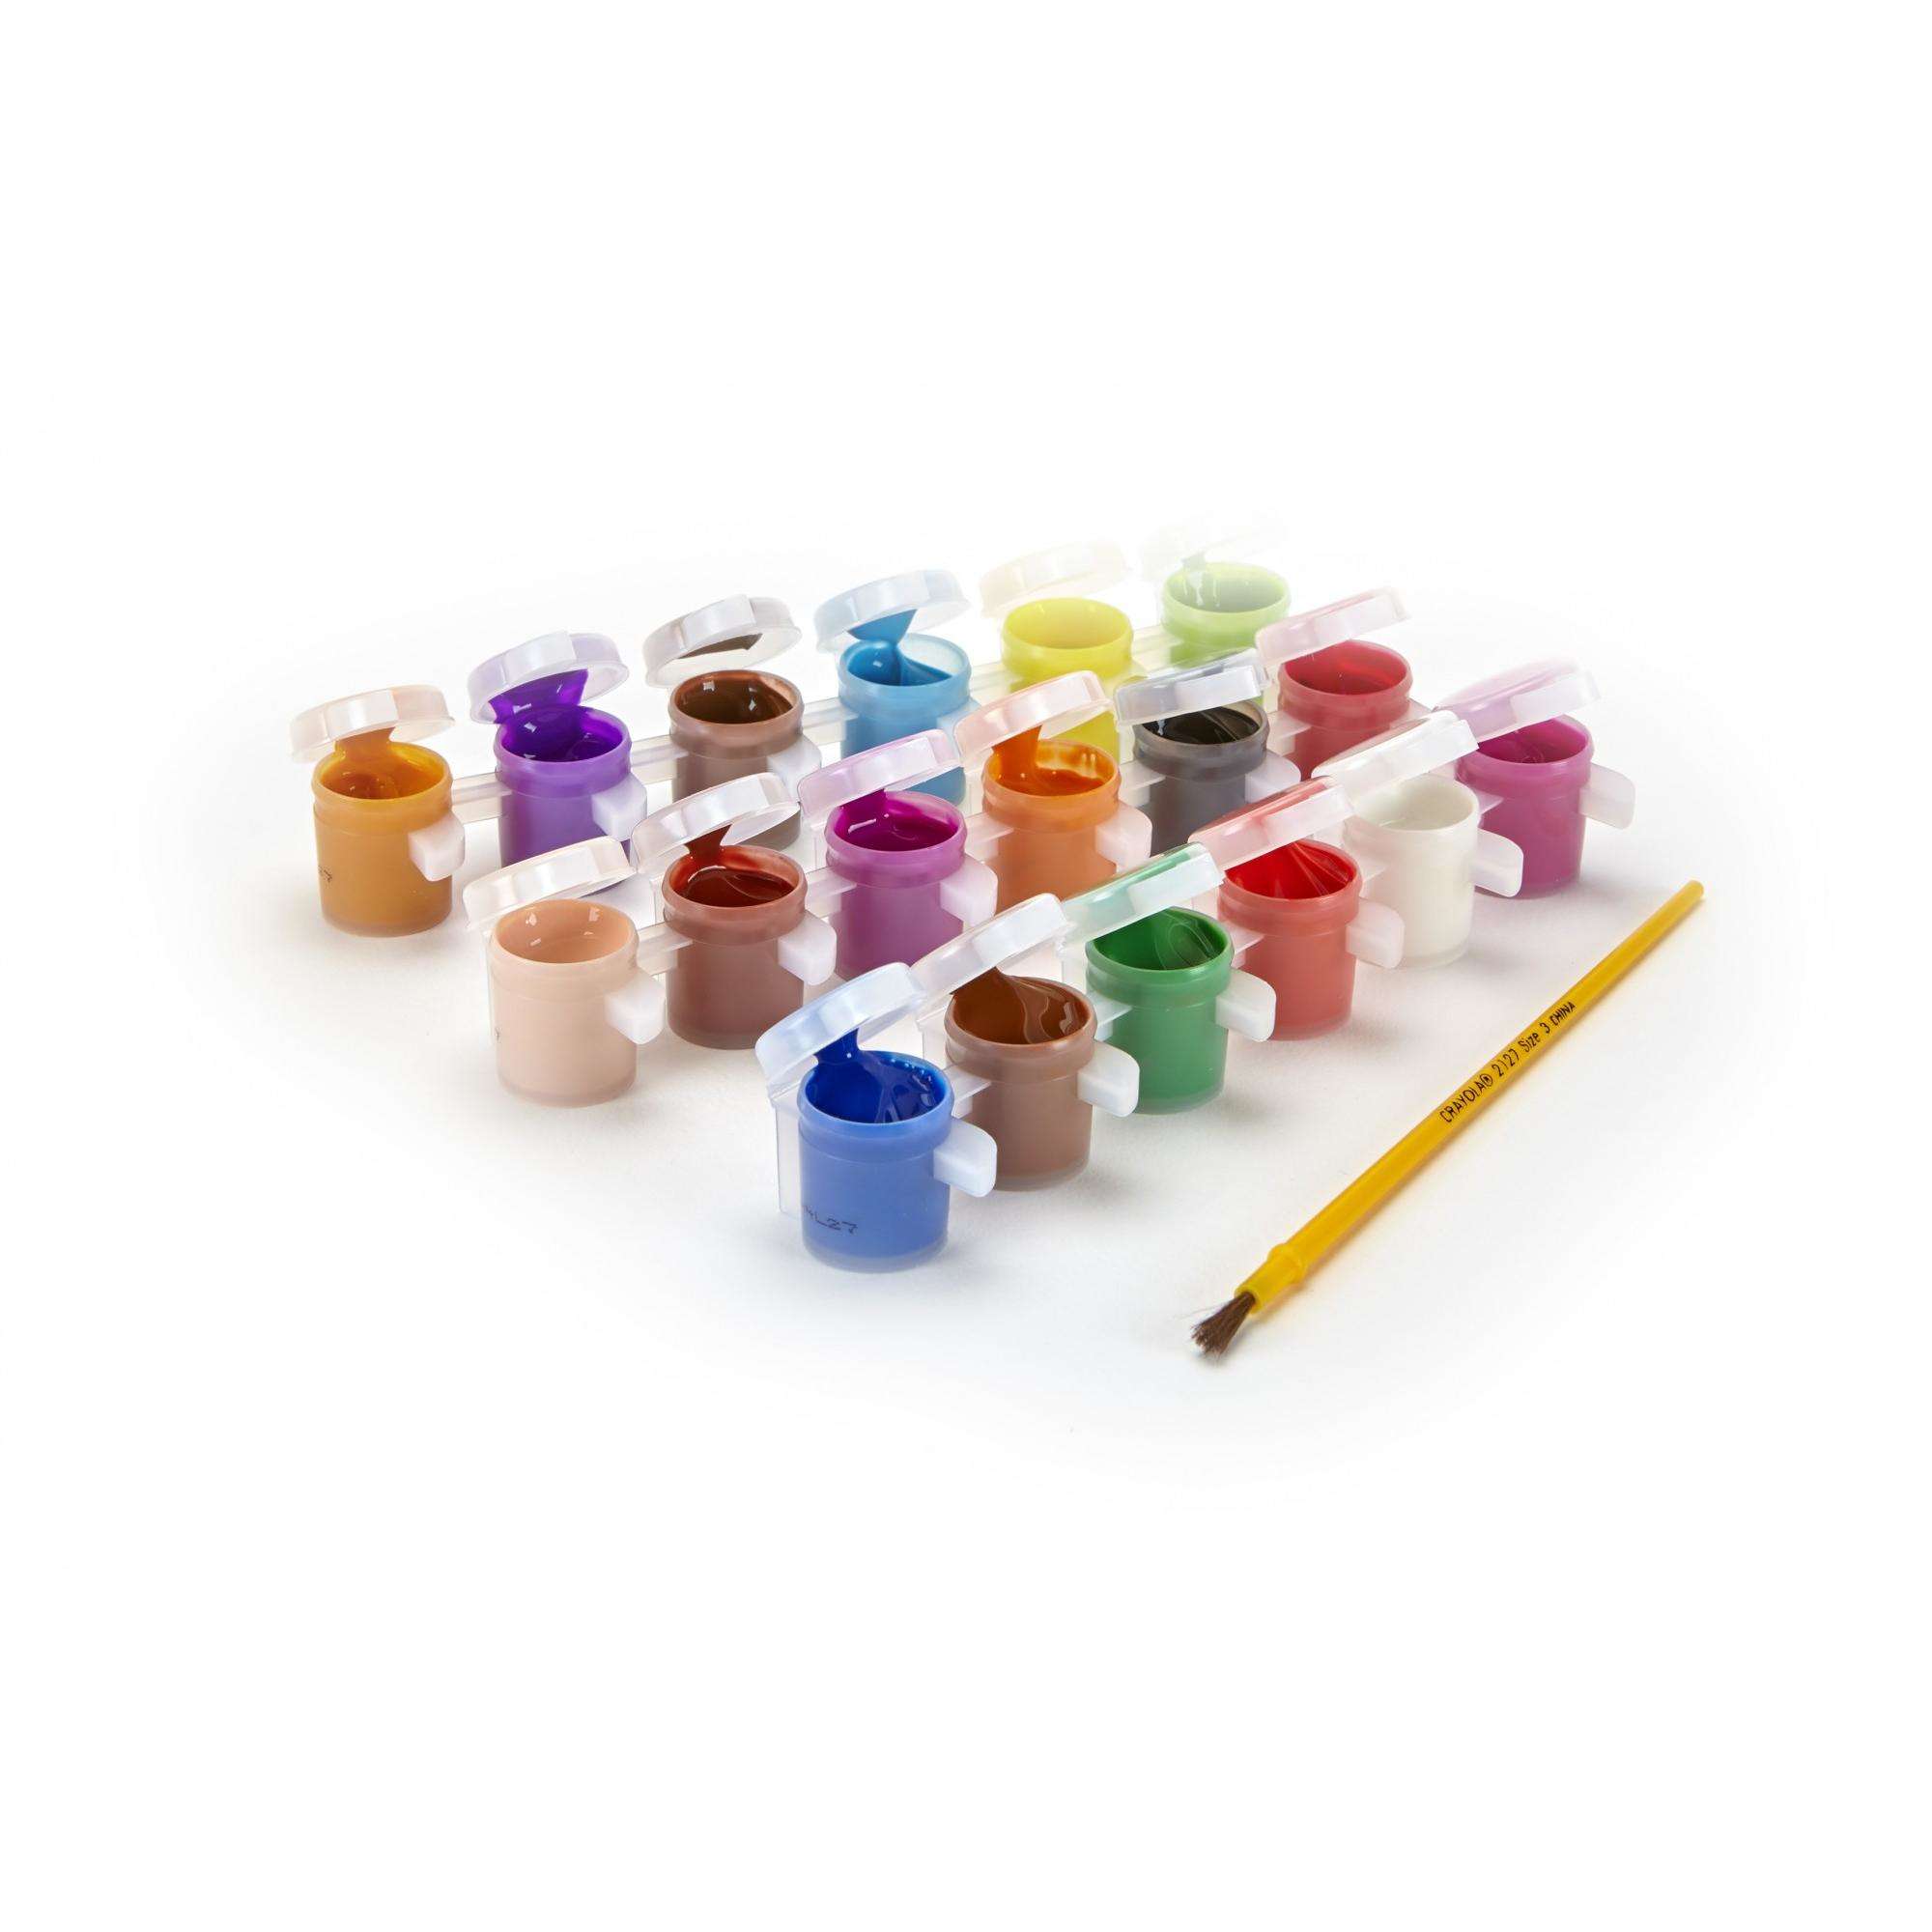 Crayola Washable Kids Paint Set, 18 Assorted Colors, Craft Supplies, Gift For Kids - image 4 of 11